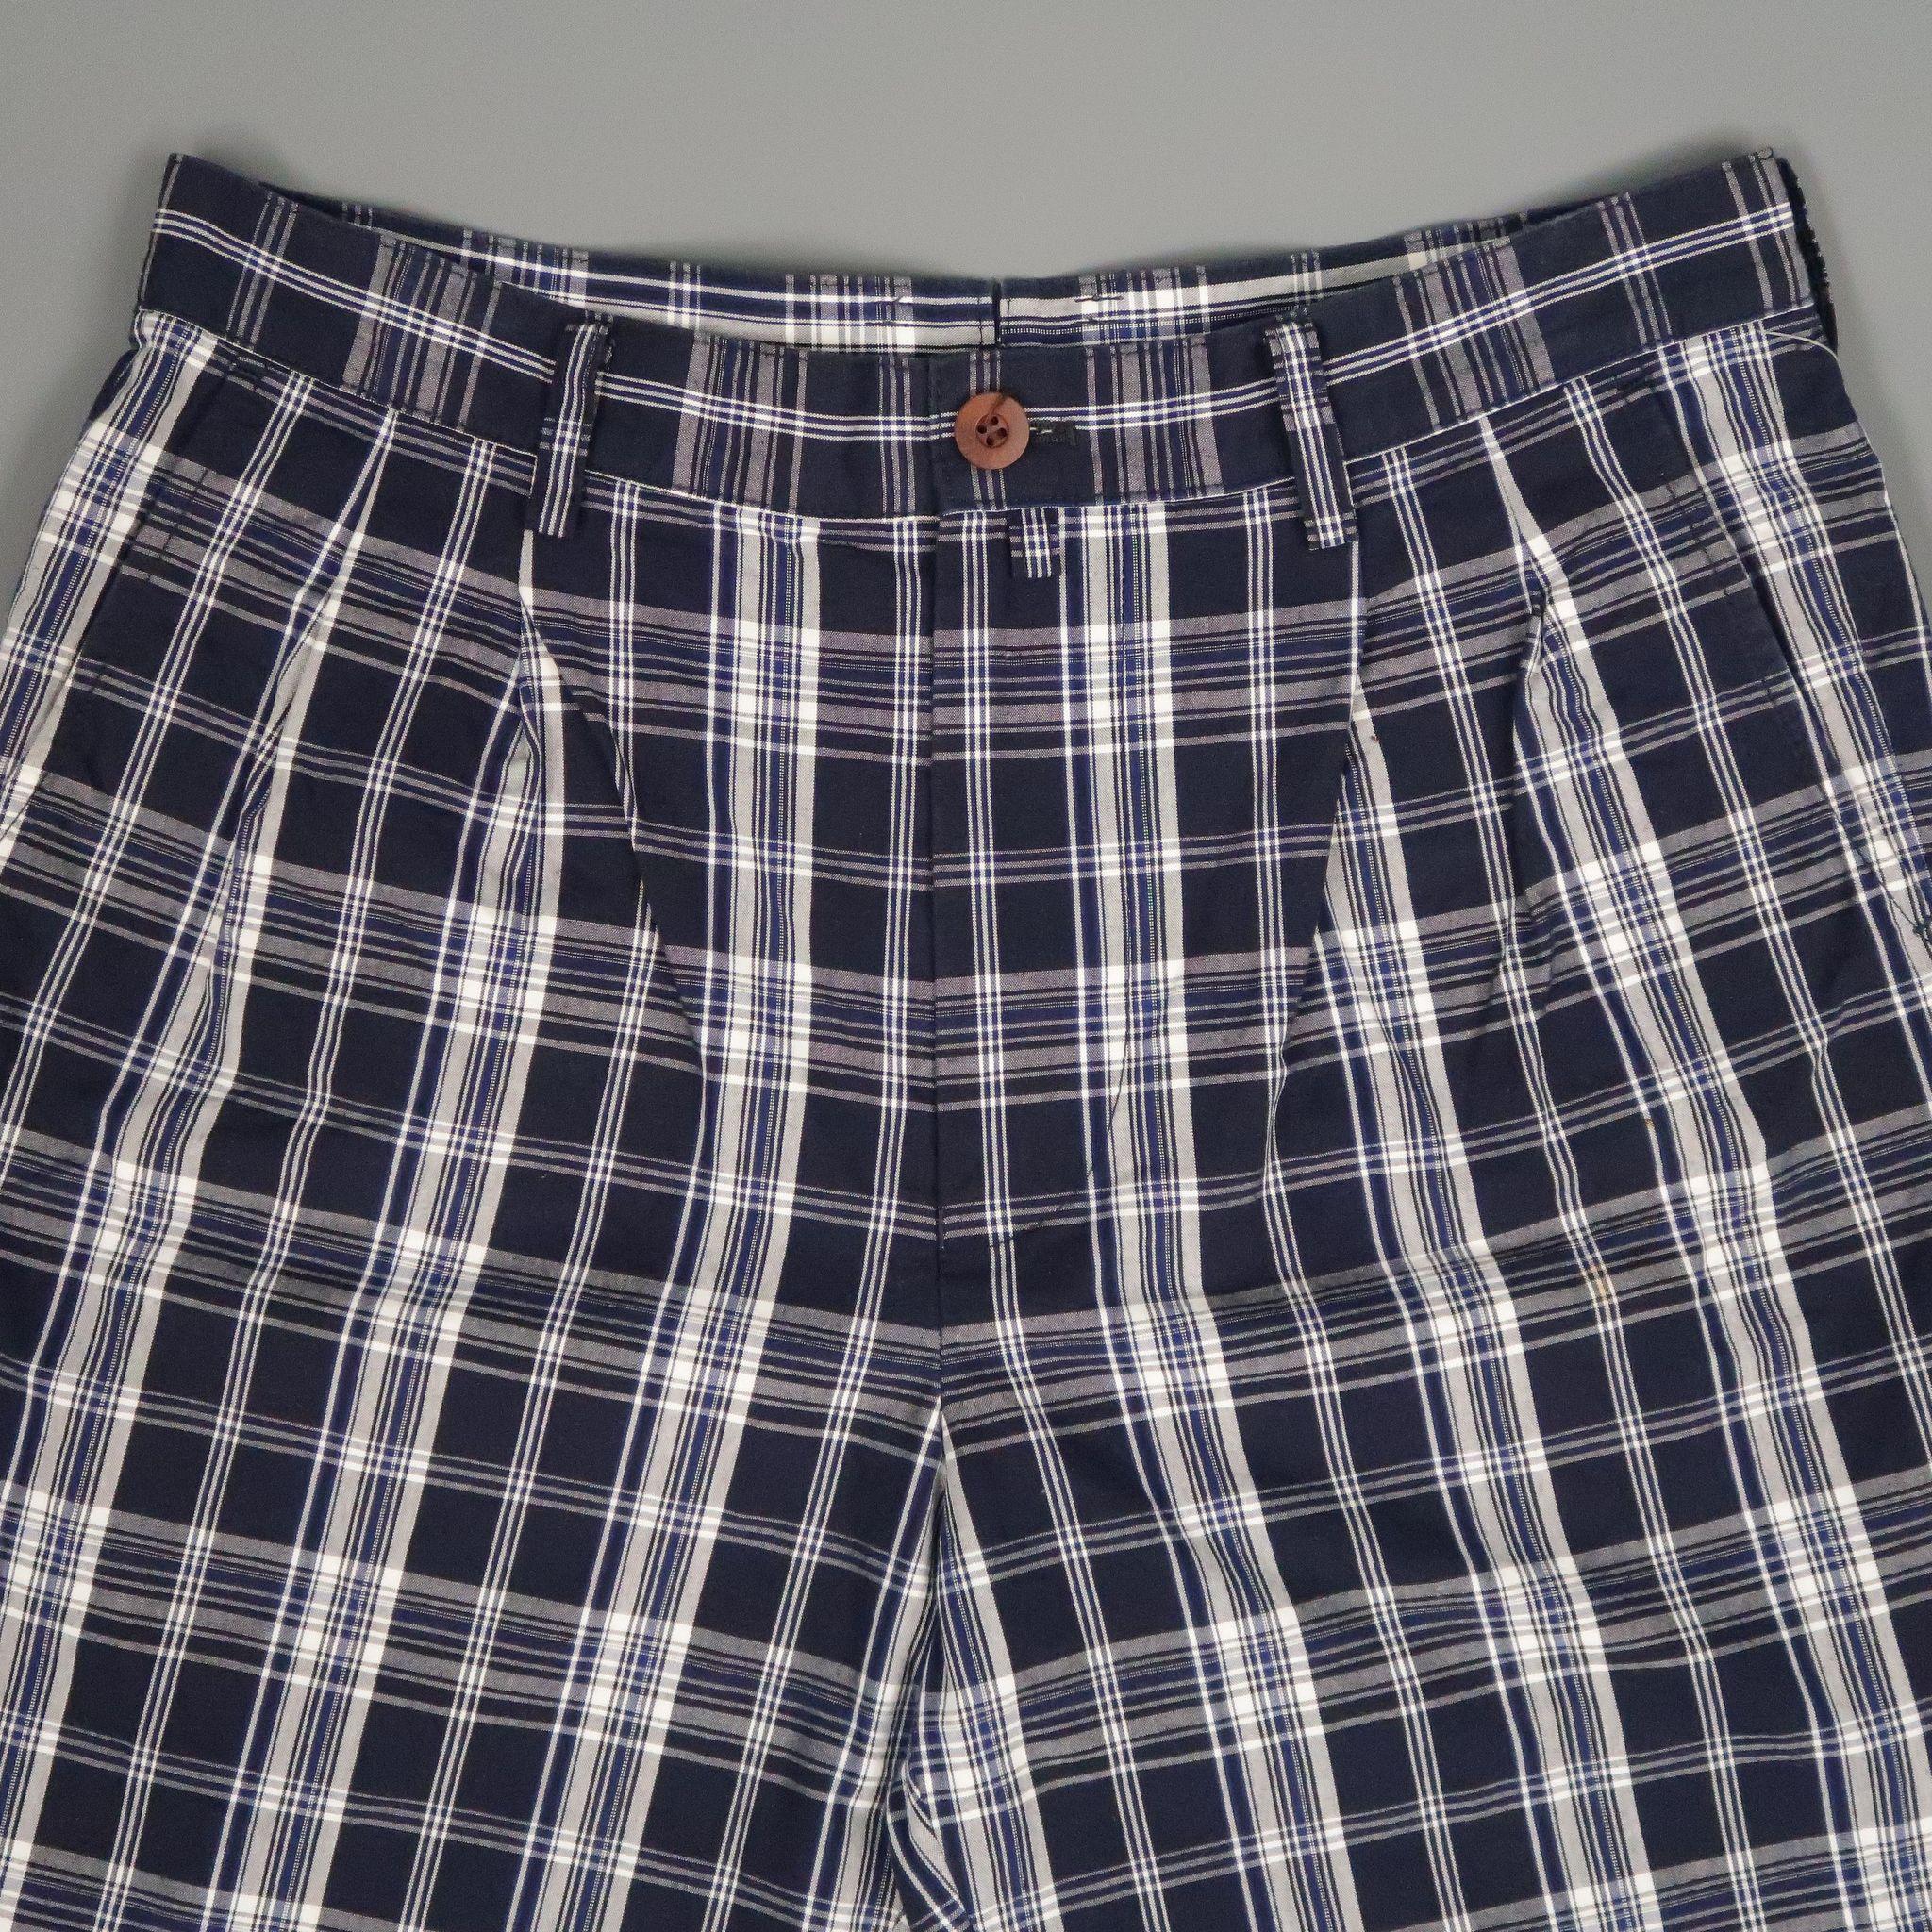 JUNYA WATANABE Shorts comes in navy and white tones in a plaid cotton material, with a pleated front, zip fly, seam and patch pockets. Made in Japan.
 
Excellent Pre-Owned Condition.
Marked: S
 
Measurements:
 
Waist: 32 in.
Rise: 12 in.
Inseam: 